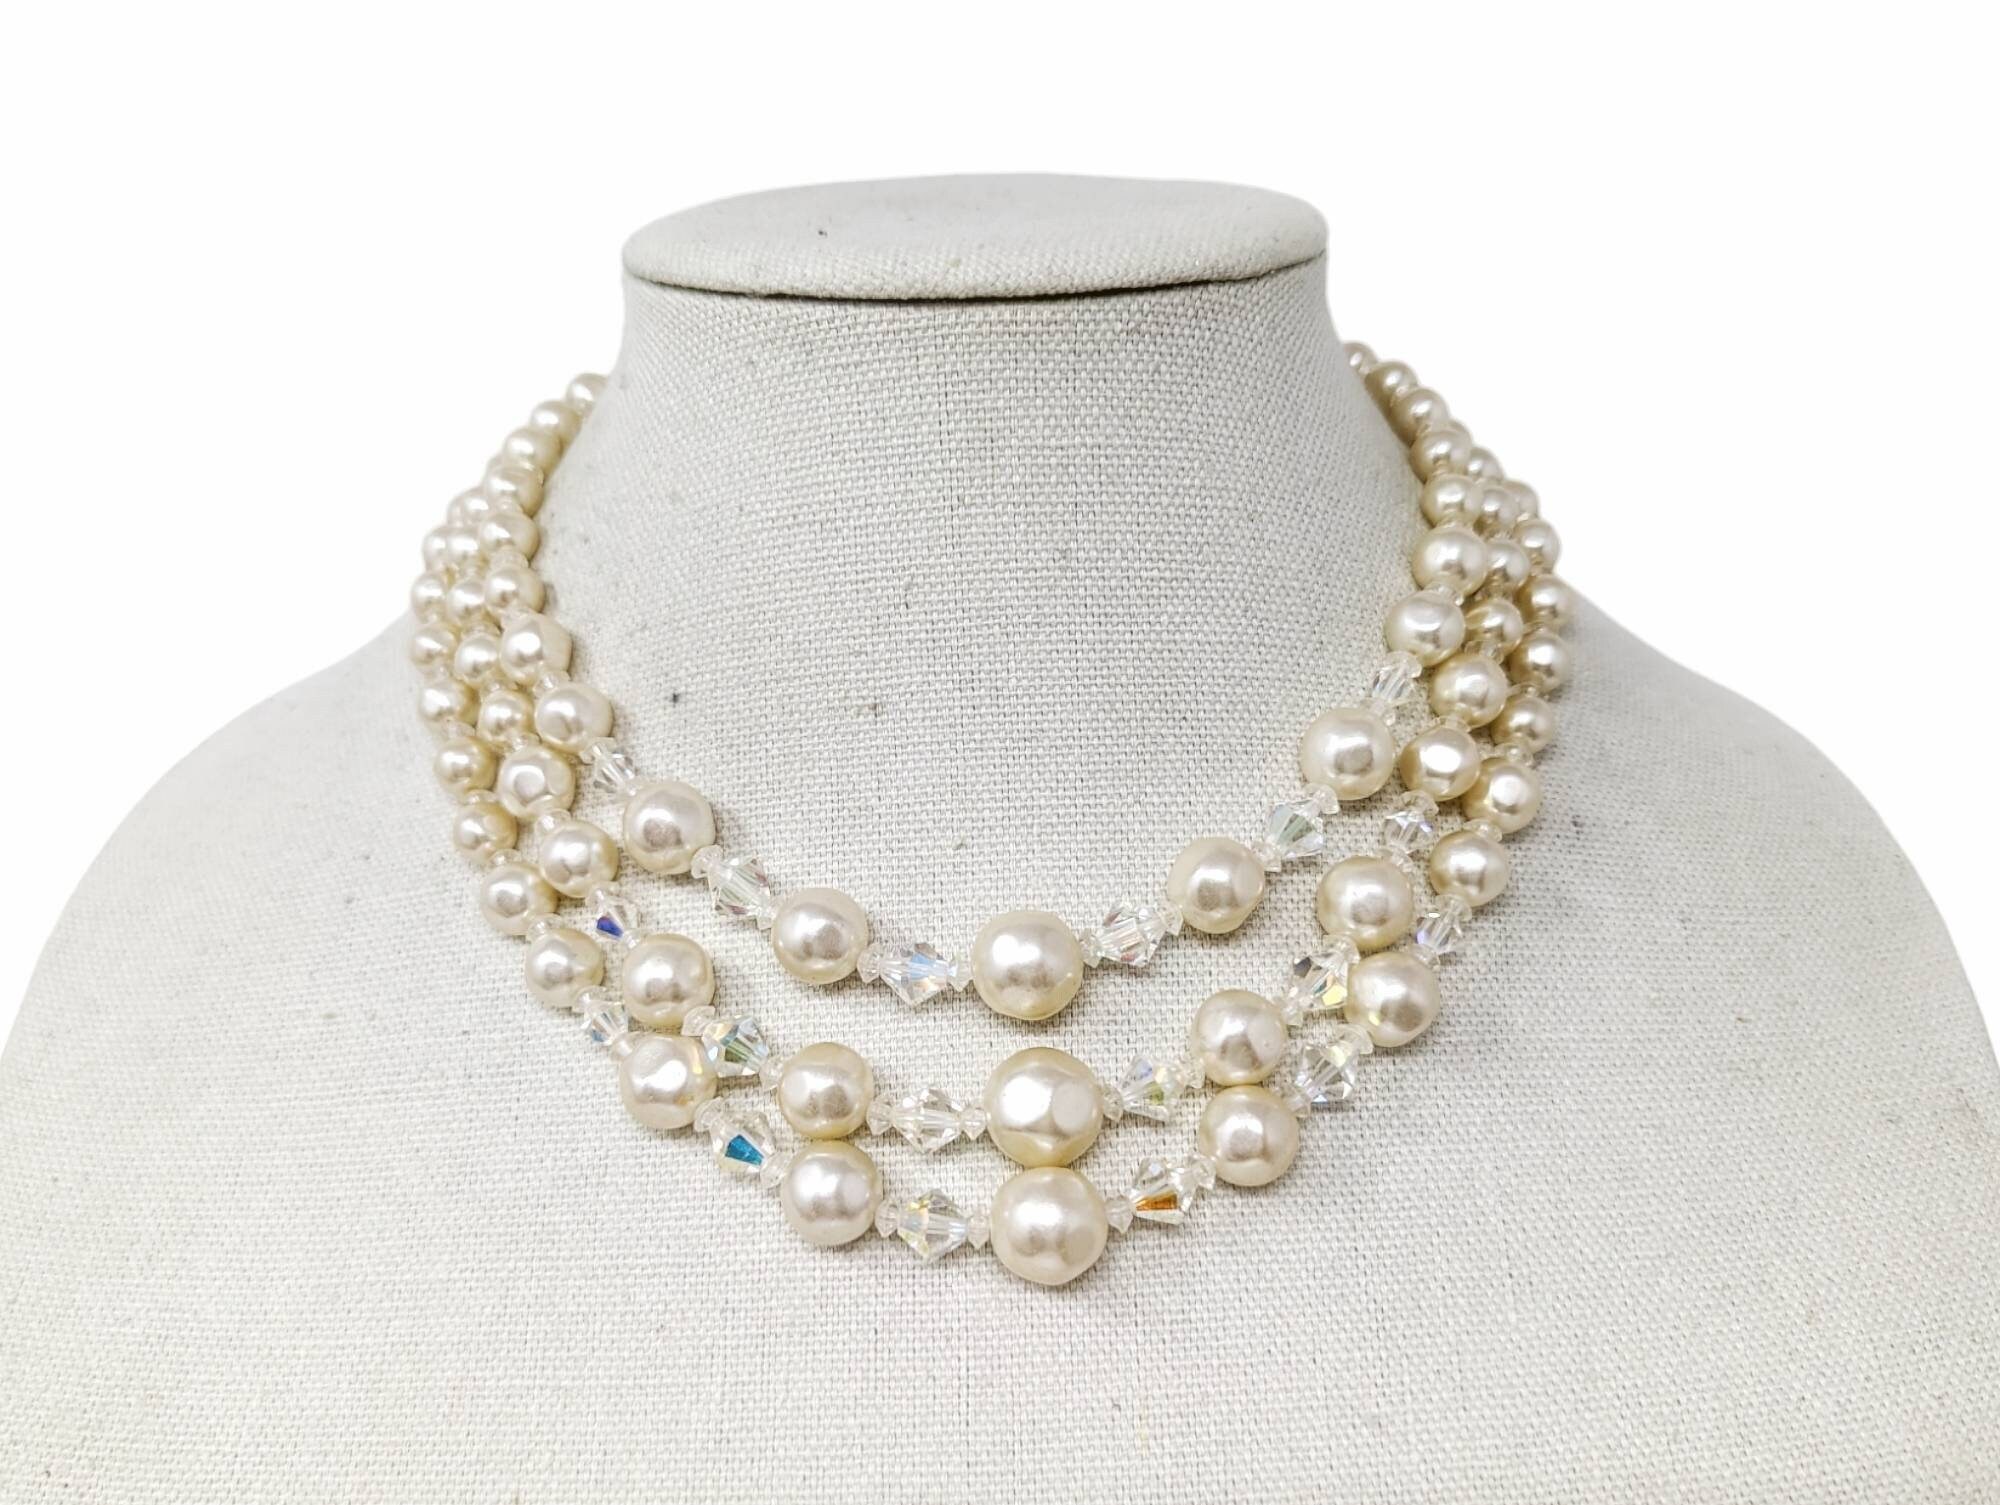 Vintage Faux Pearl Necklace With Sterling Clasp, Ivory Pearls